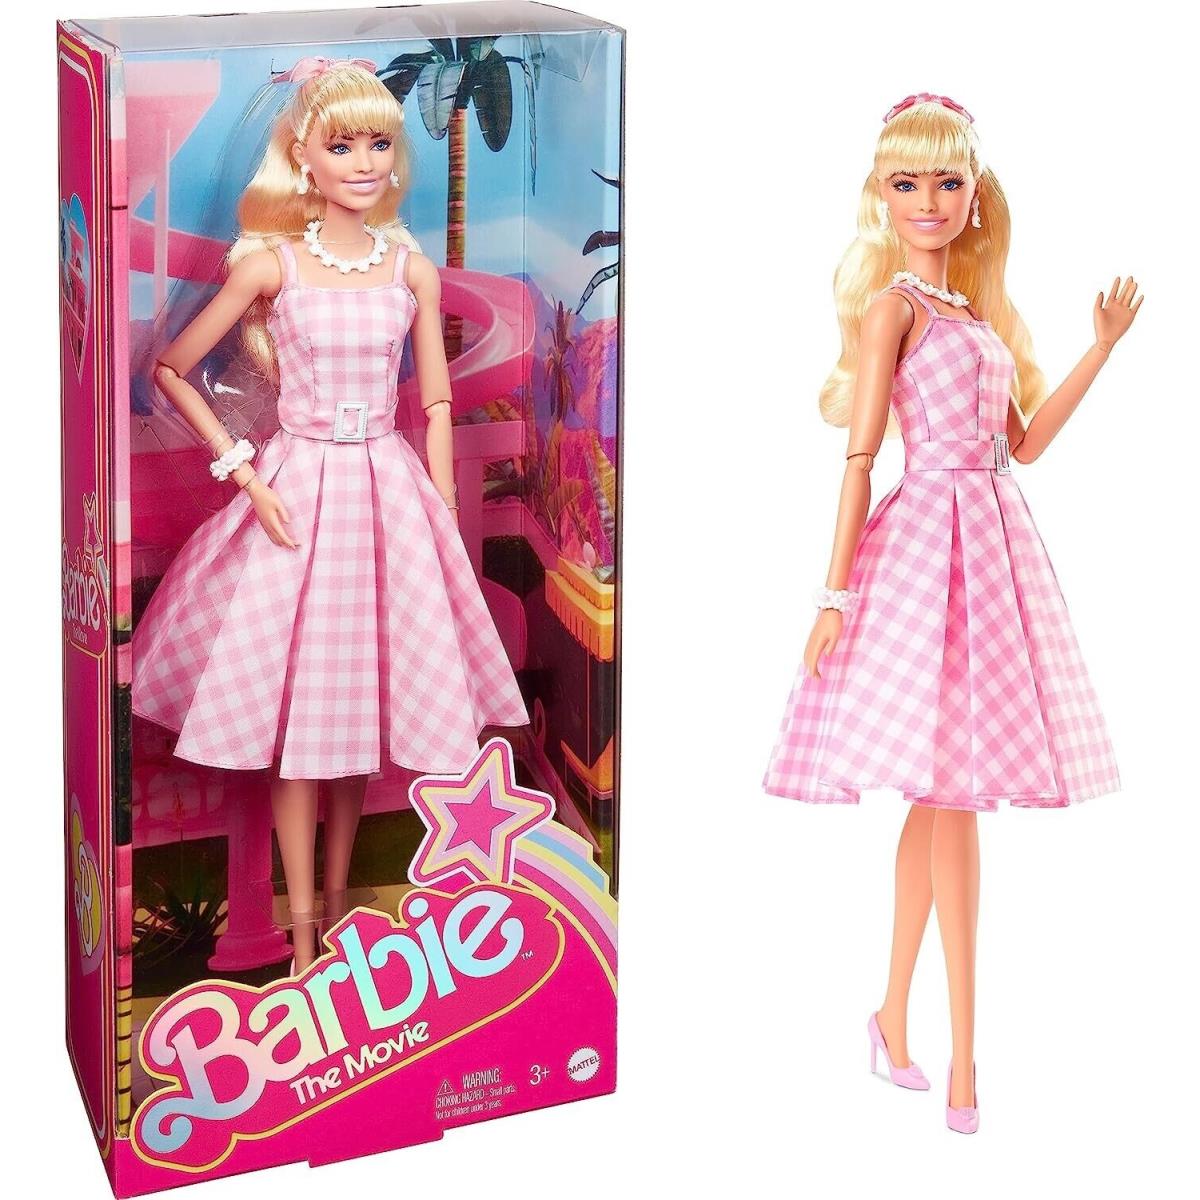 Barbie The Movie Margot Robbie Collector Doll Wearing Pink Gingham Dress